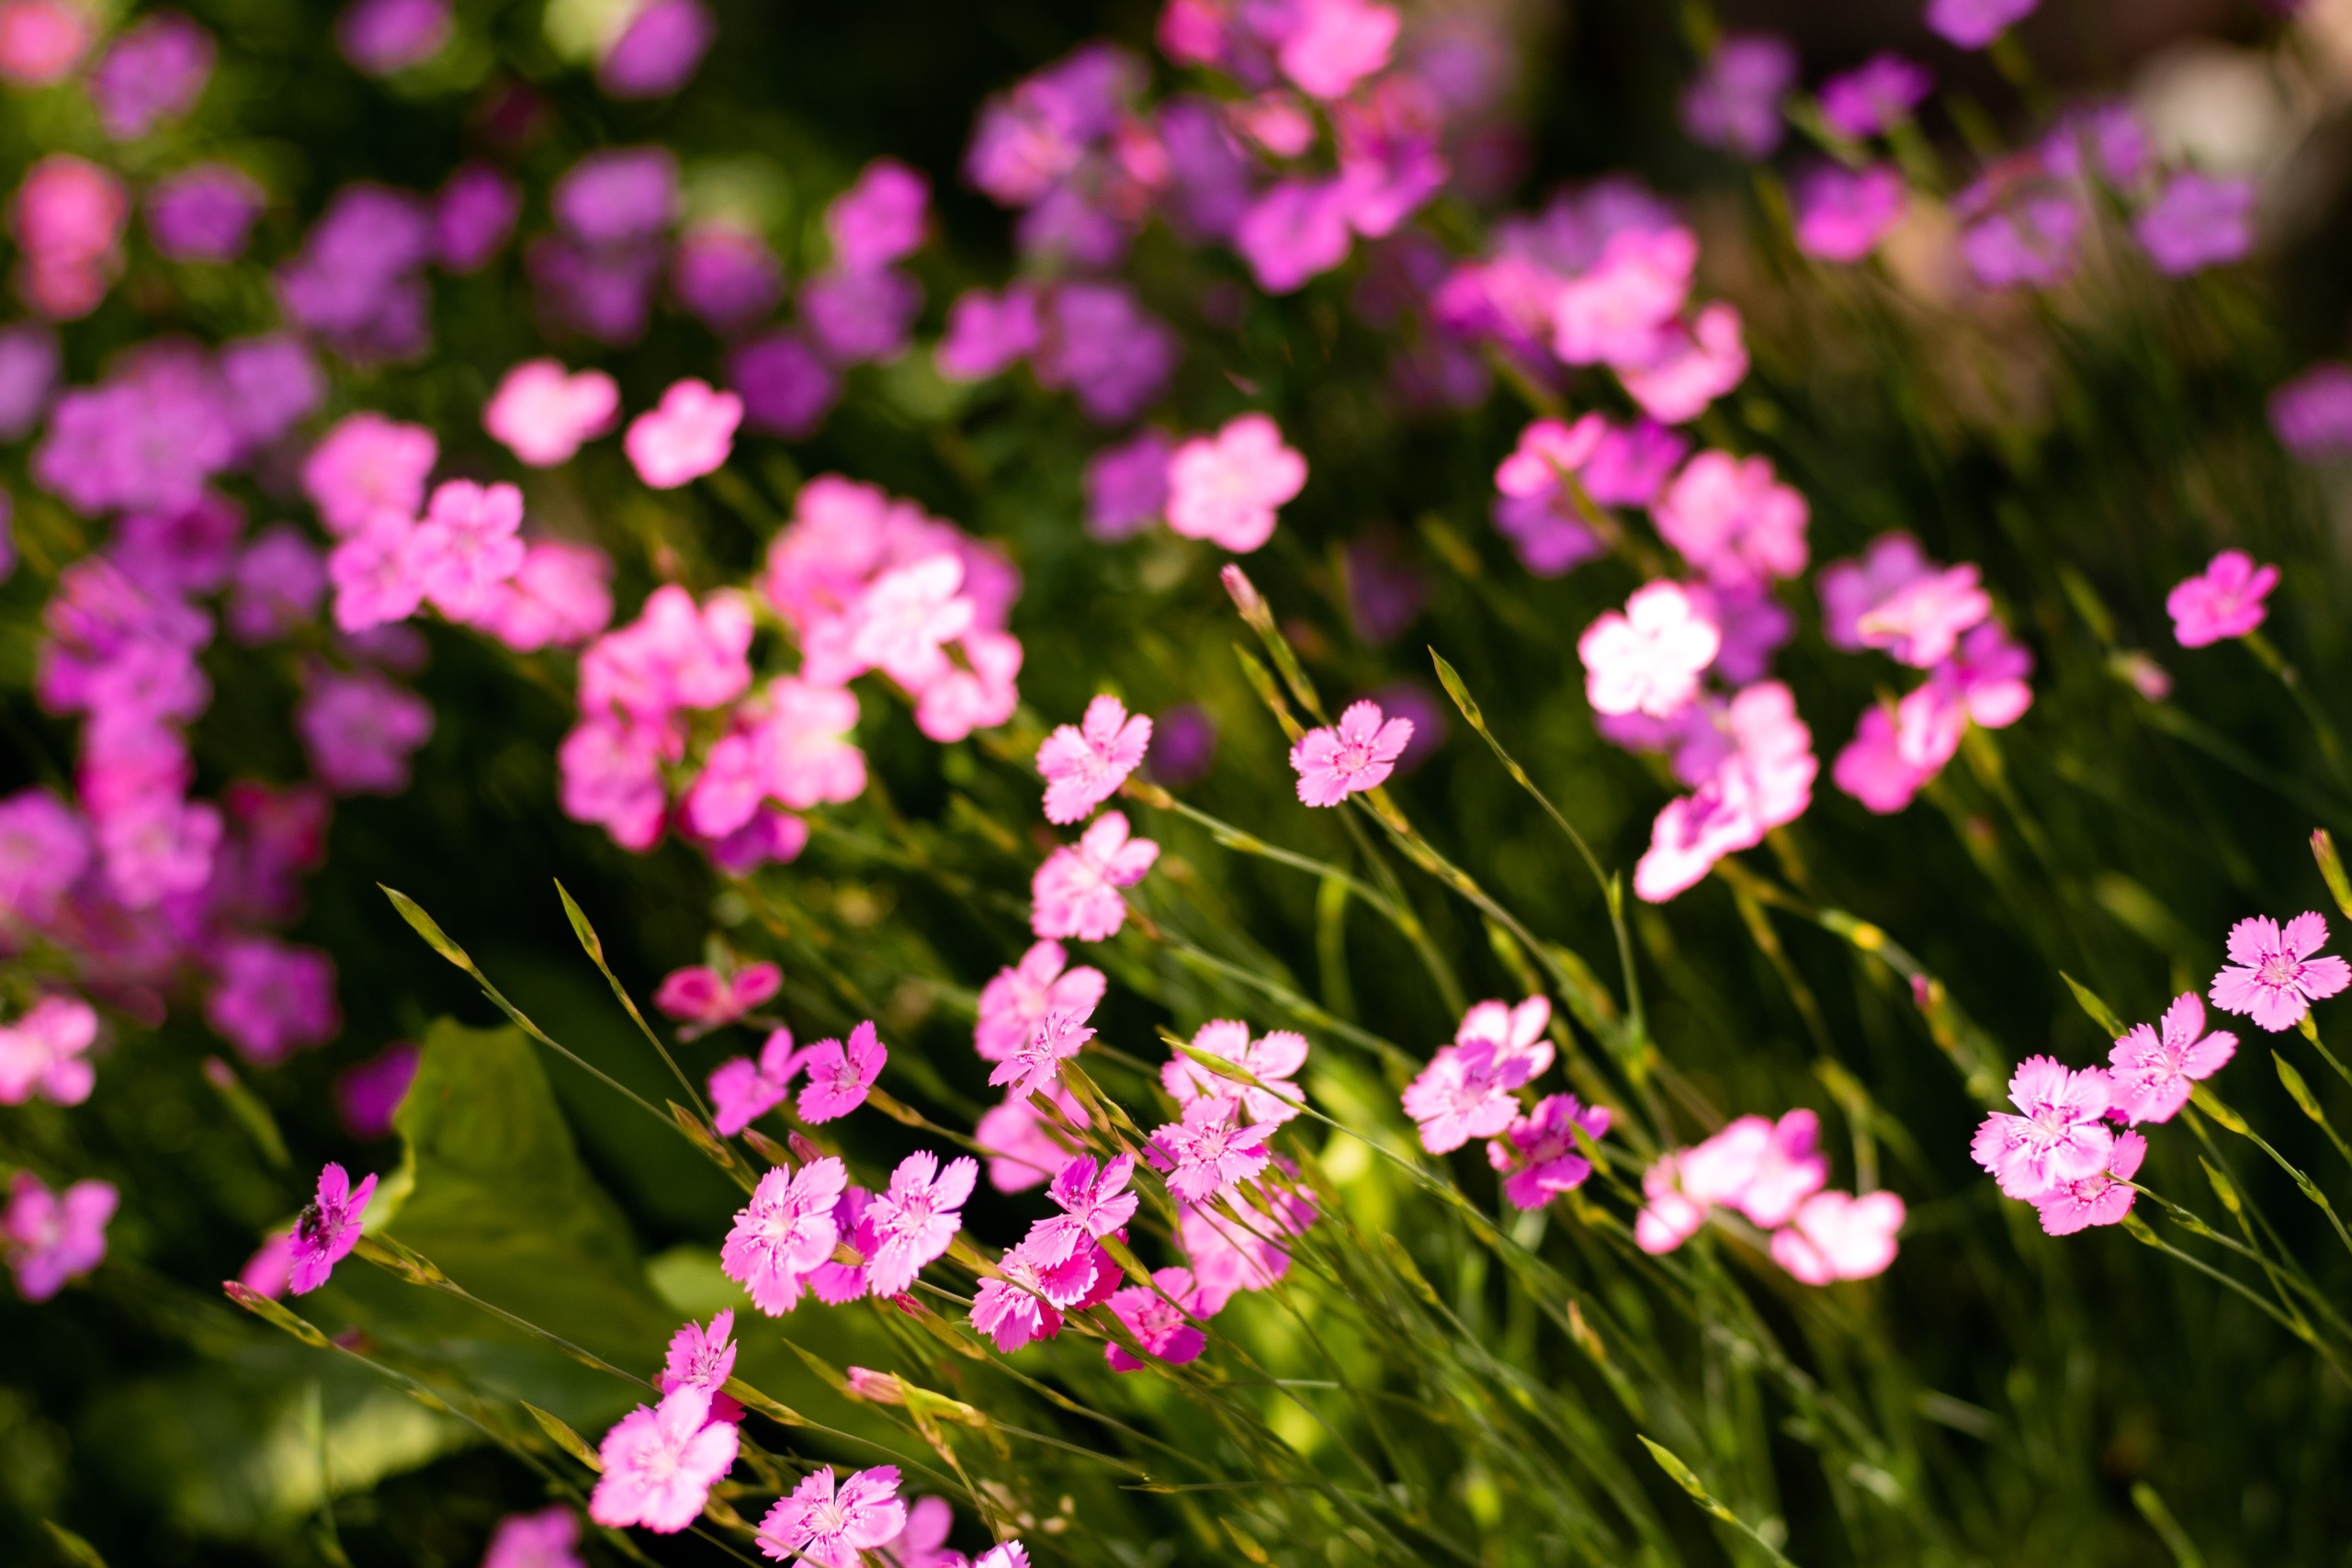 General 2560x1707 flowers nature plants colorful outdoors pink flowers closeup